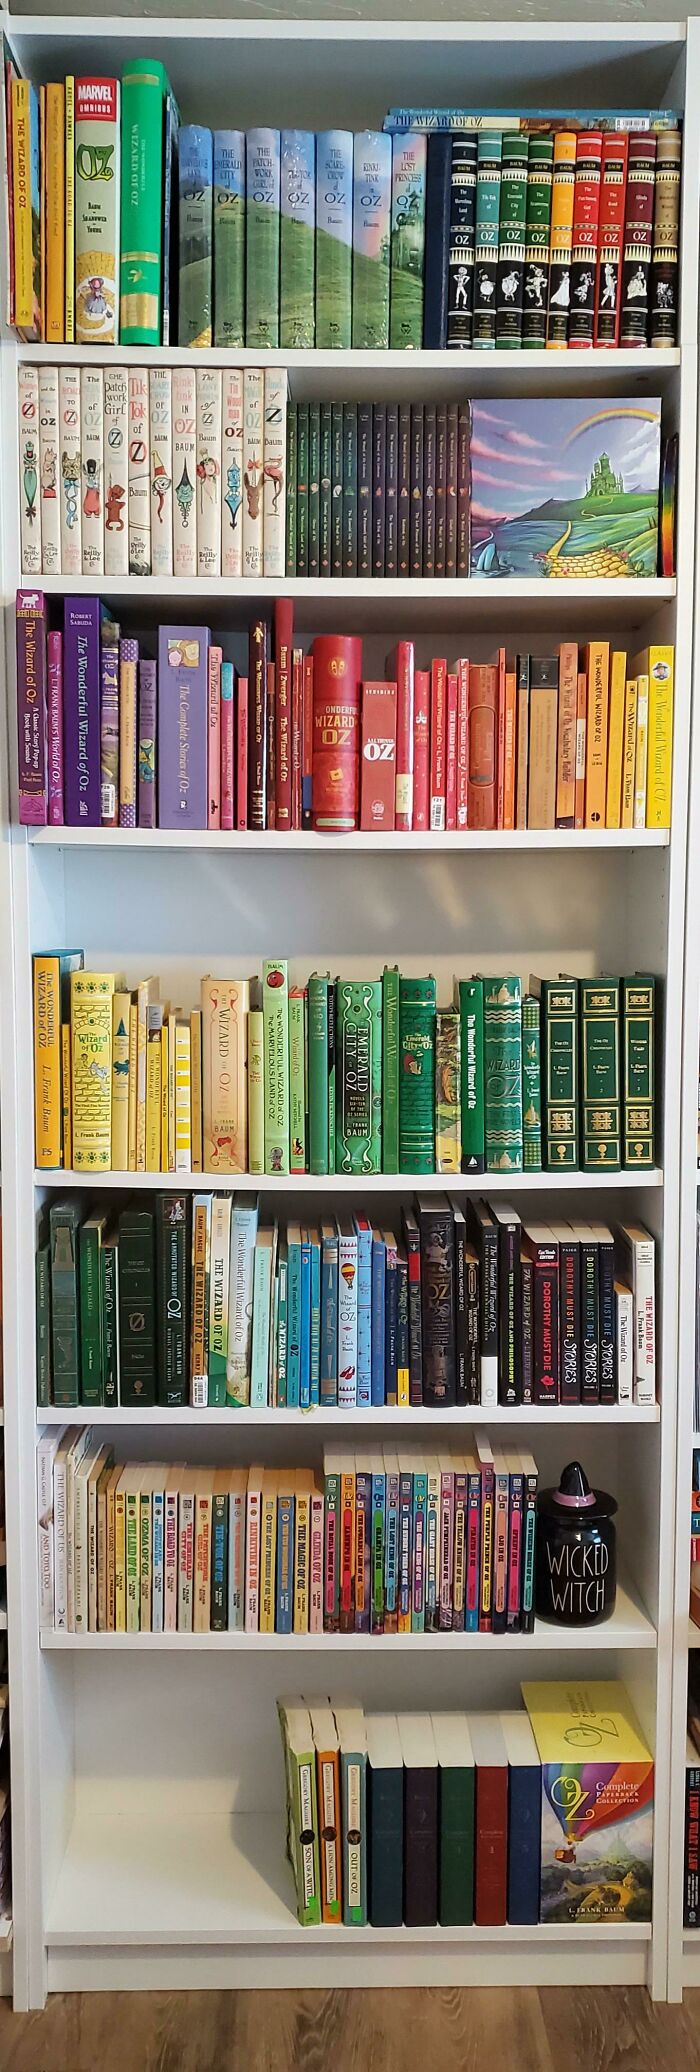 Wizard Of Oz Book Collection